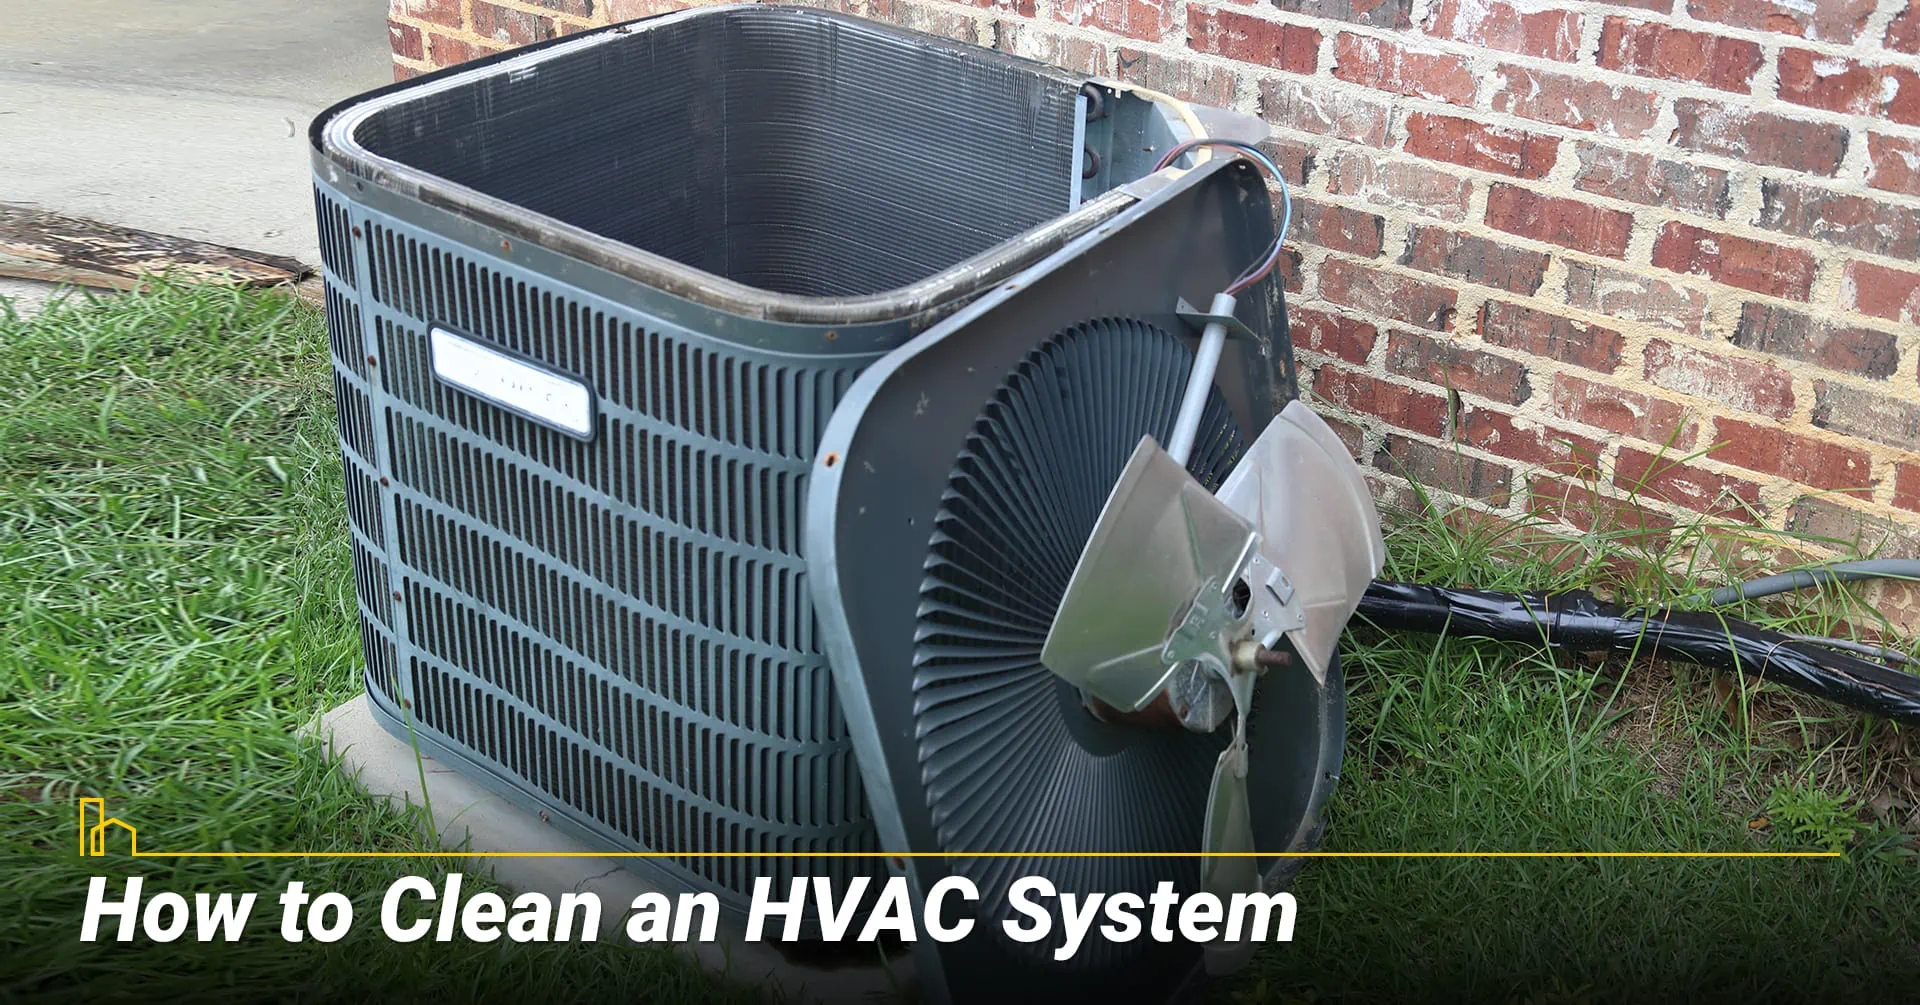 How to Clean an HVAC System